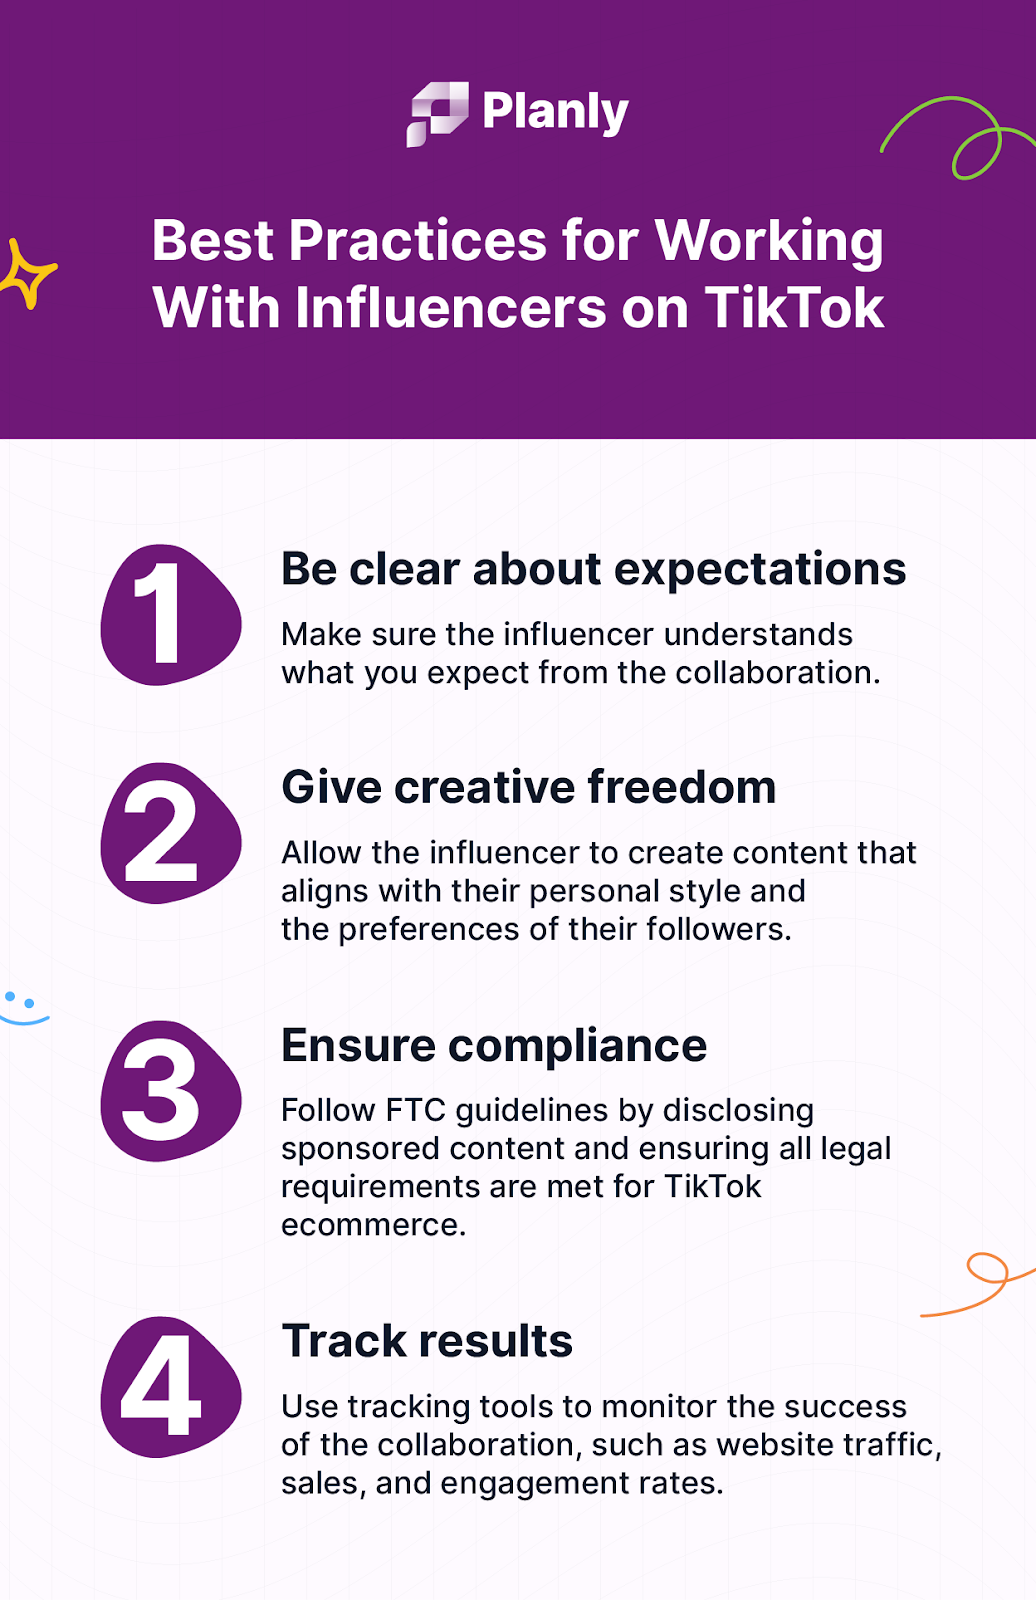 Best practices for working with influencers on TikTok